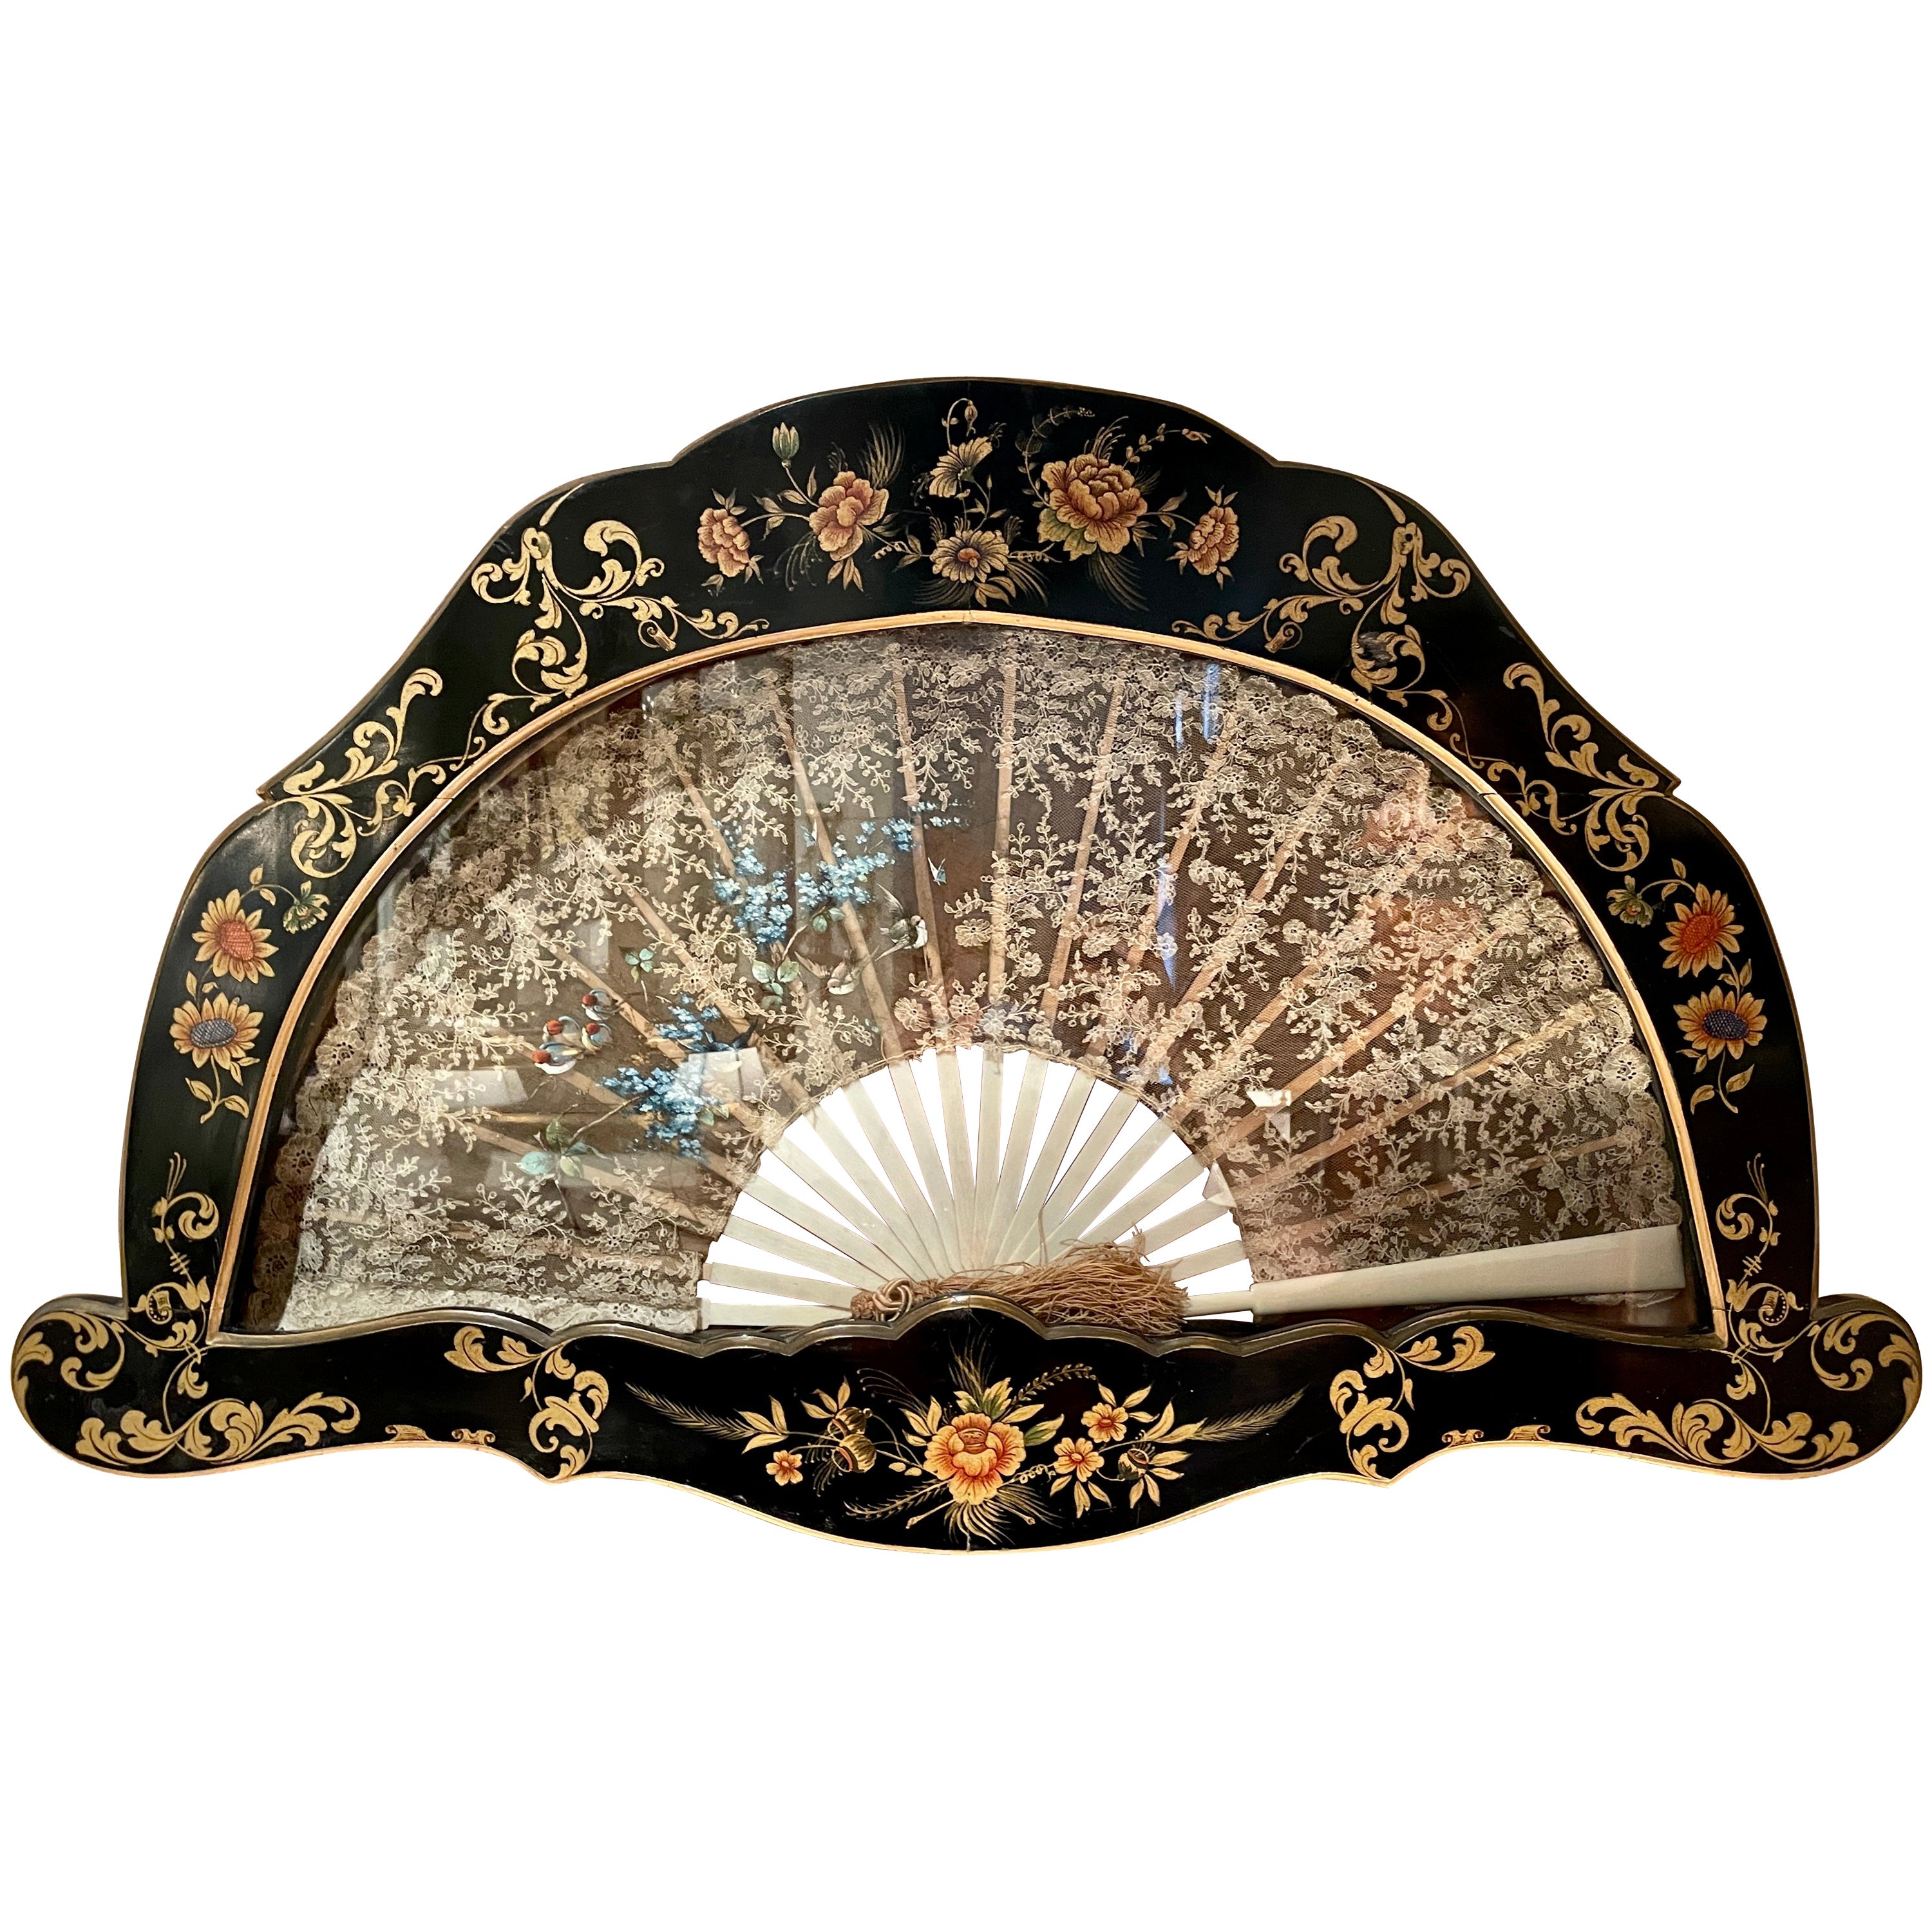 Antique 19th Century Chinoiserie Hand-Made Fan in a Lacquered Frame, circa 1870